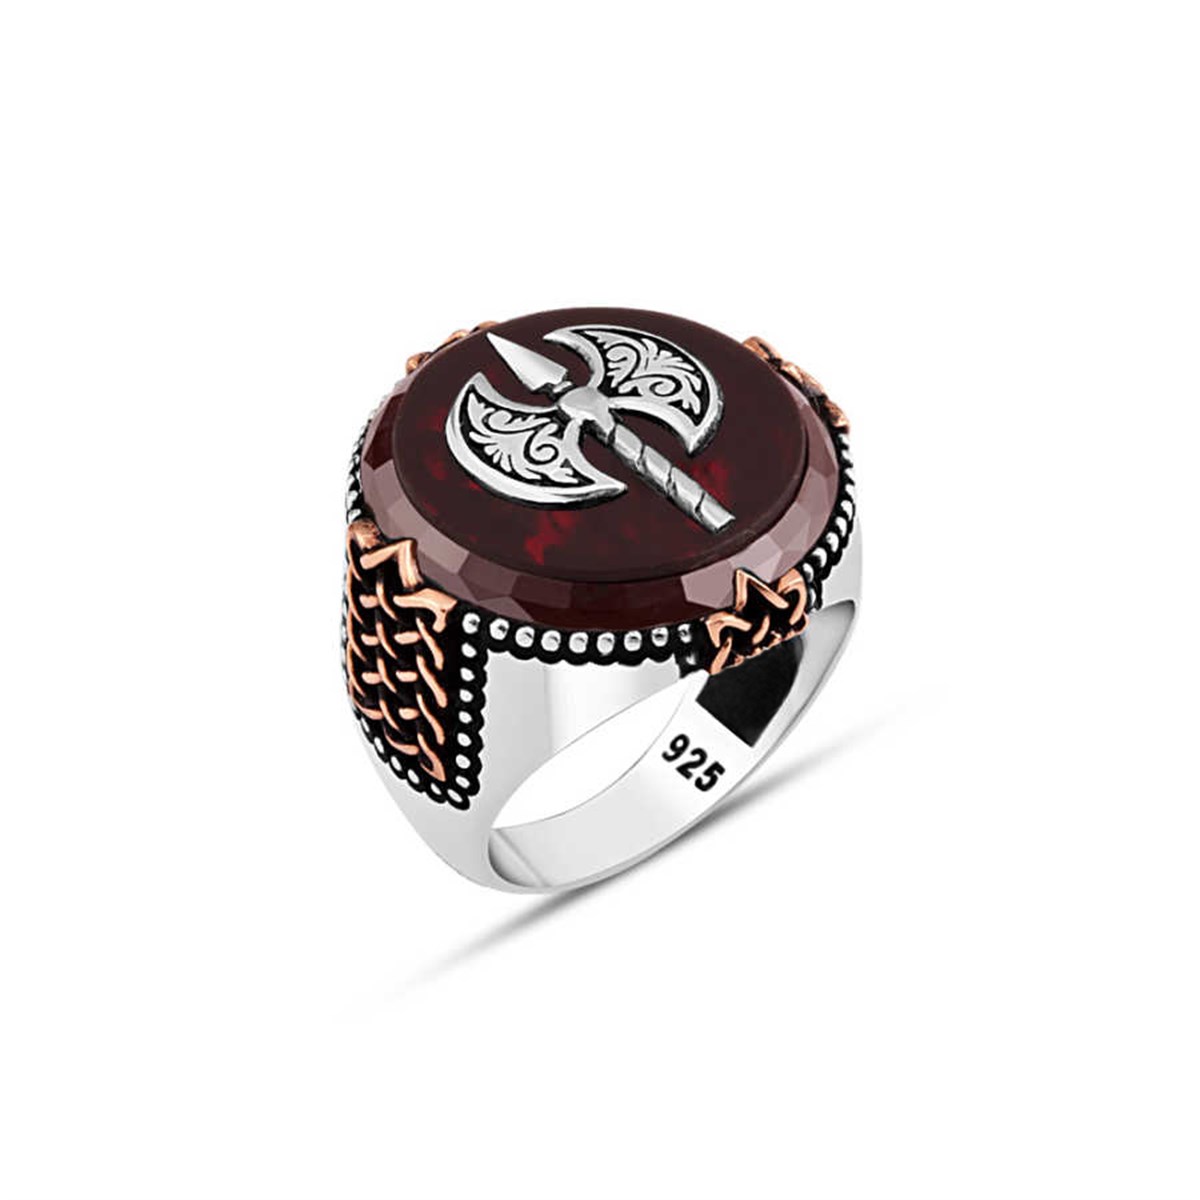 Agate Stone Double Headed Ax Silver Men's Ring